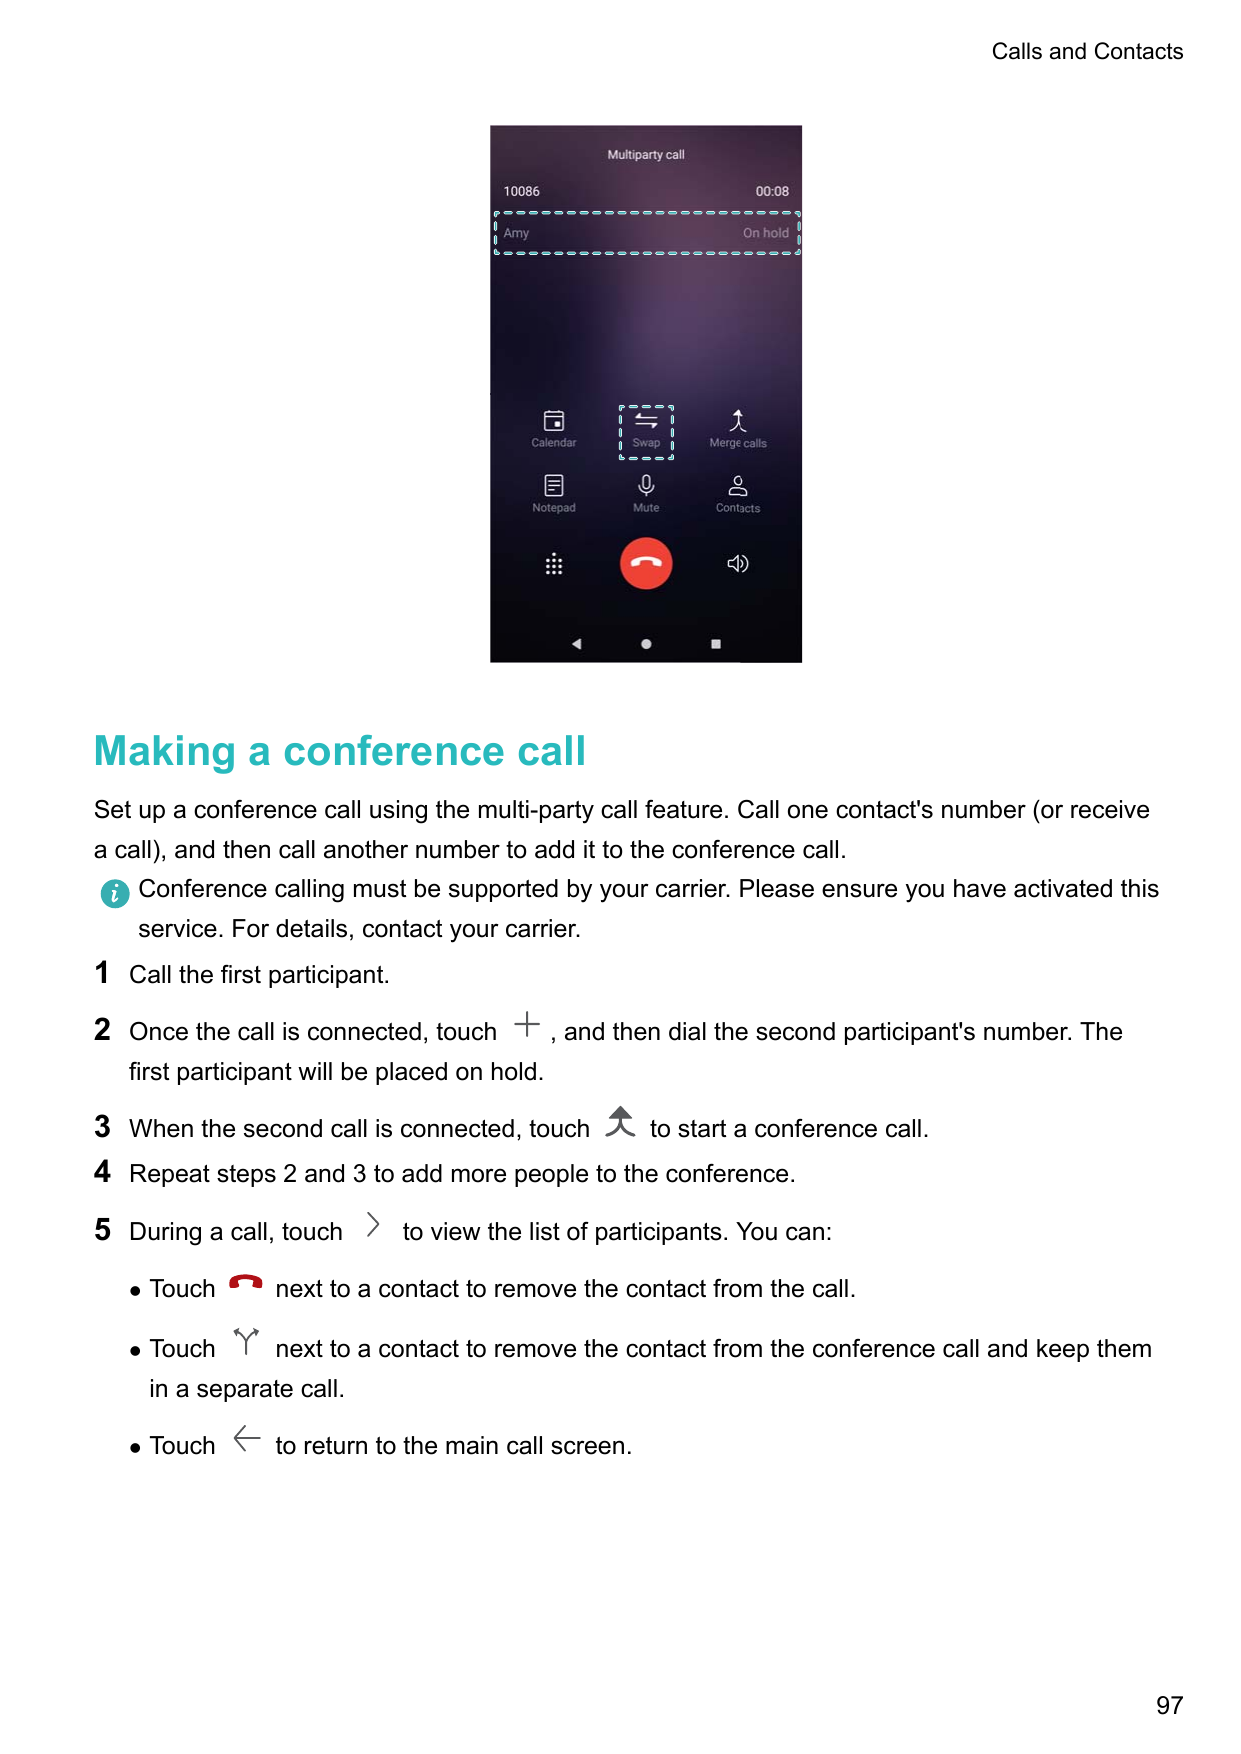 Calls and ContactsMaking a conference callSet up a conference call using the multi-party call feature. Call one contact's number